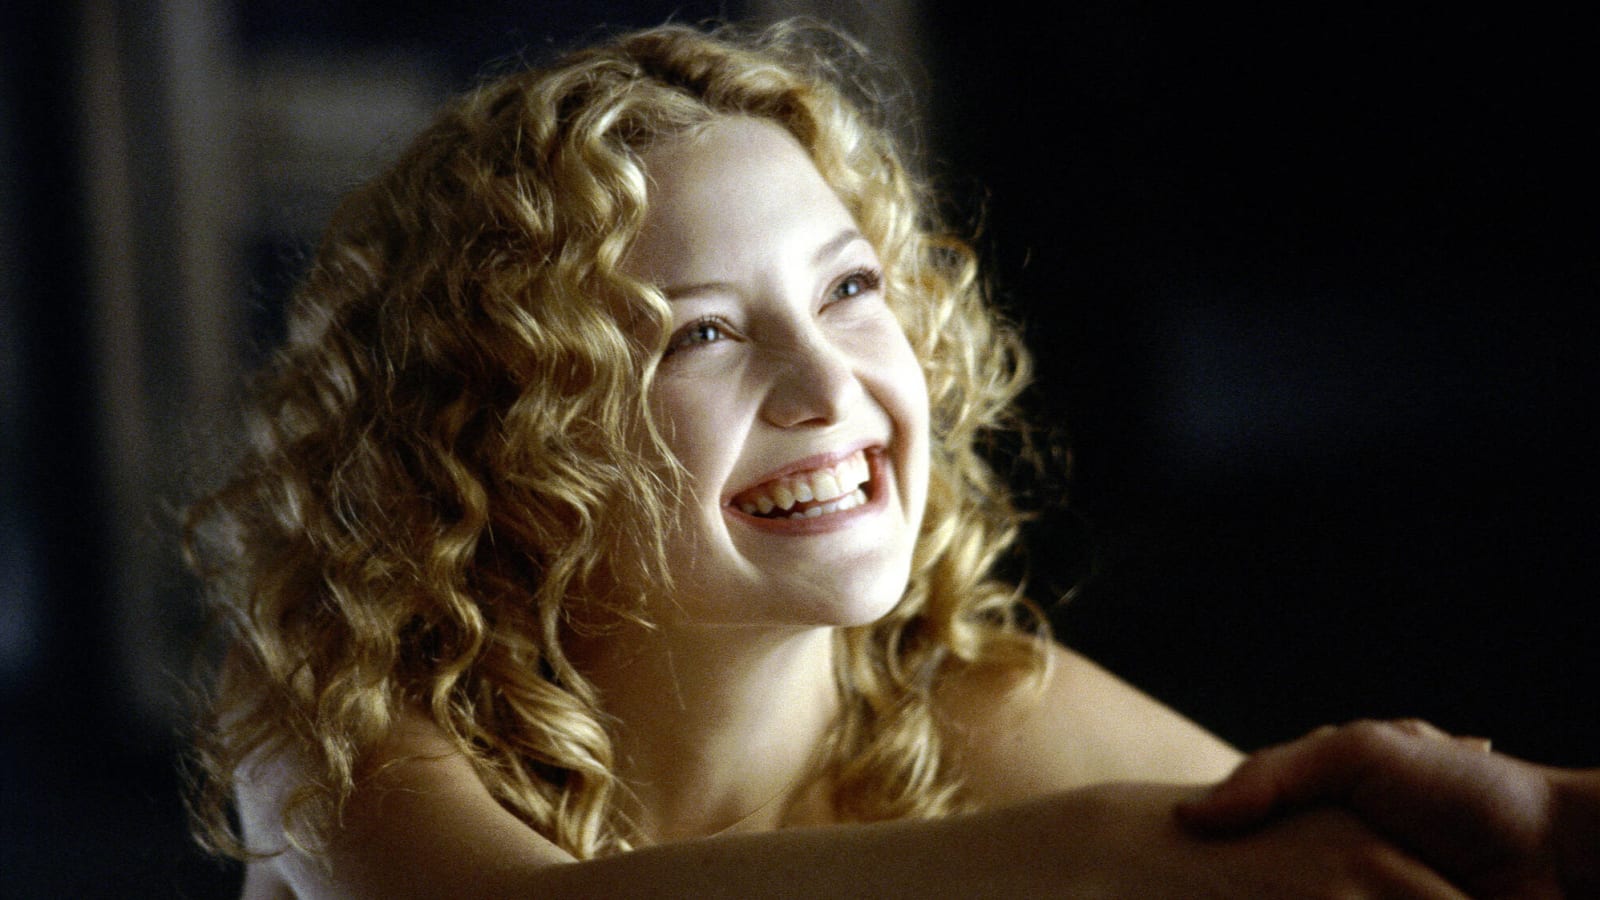 20 facts you might not know about 'Almost Famous'